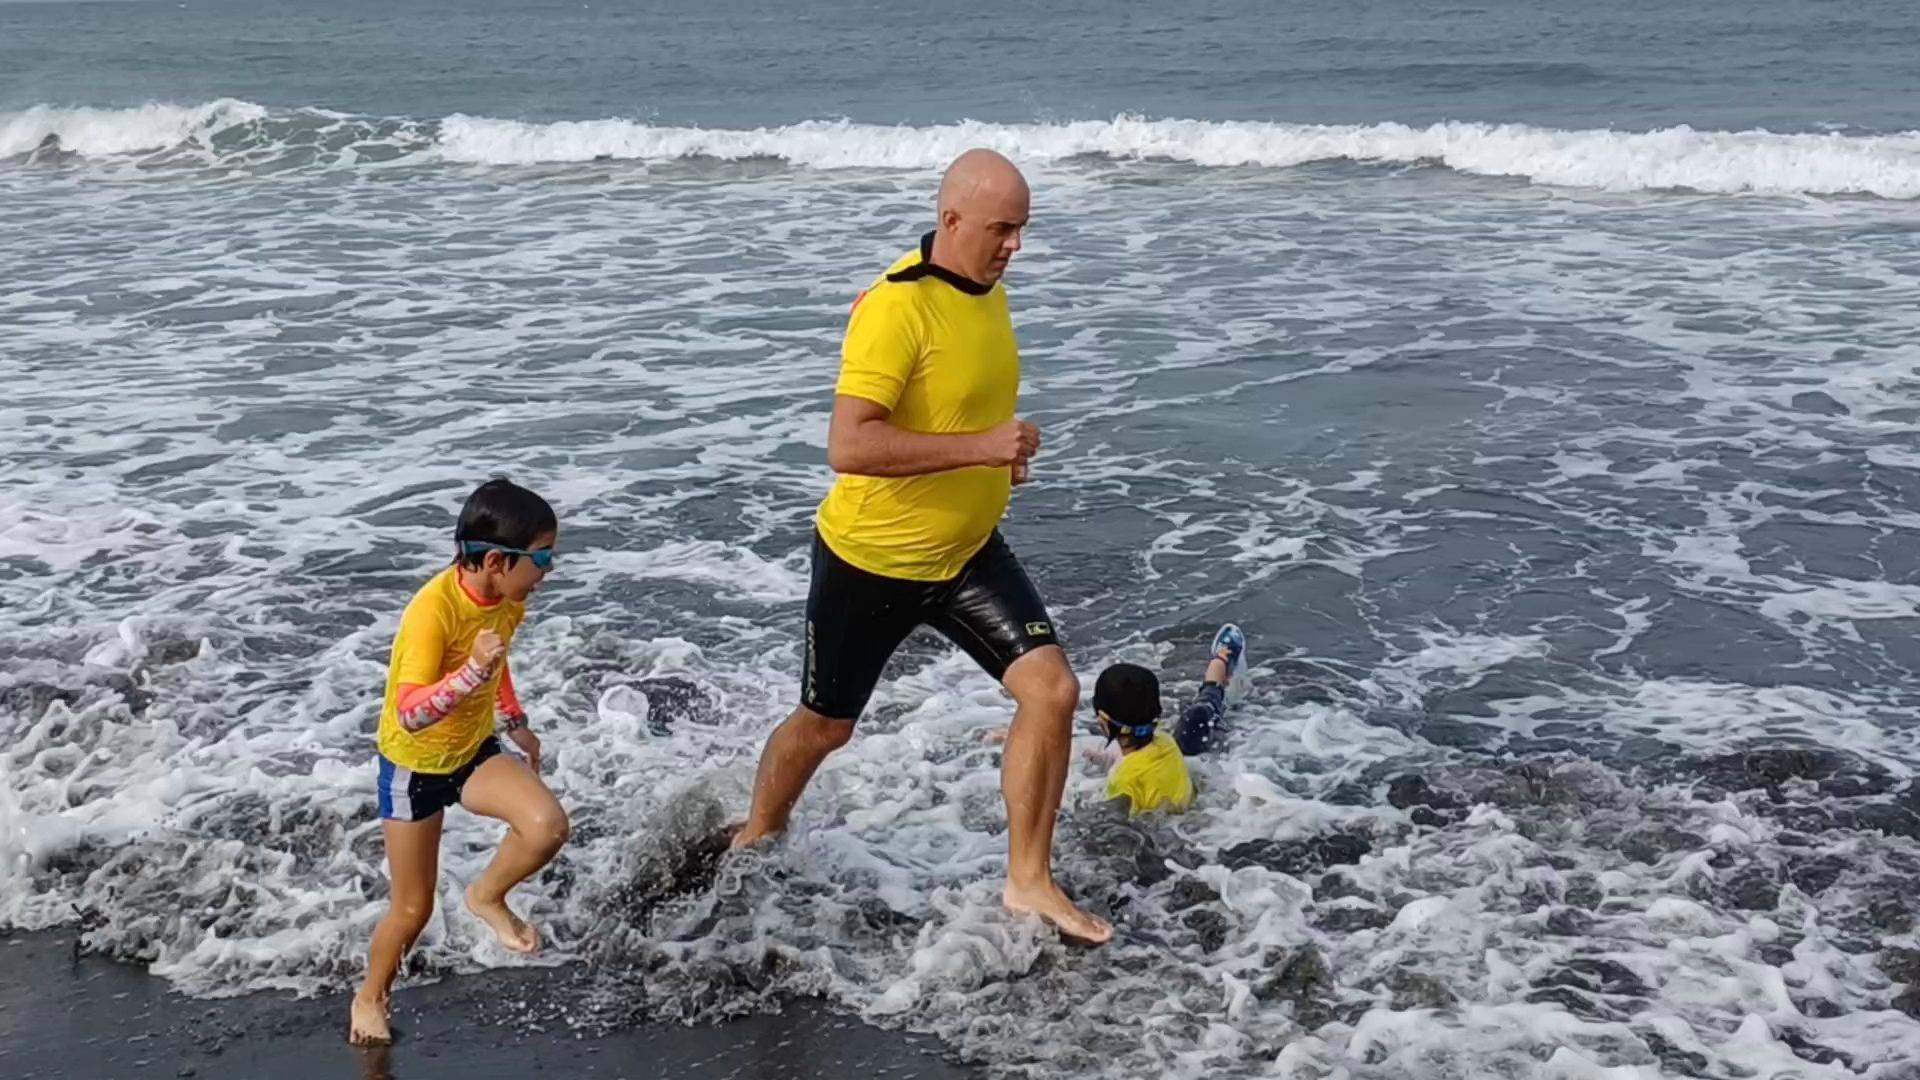 West Bay Nippers Lifesaving Taiwan Surf swim safety lesson. Coach and children bodysurfing and wading.